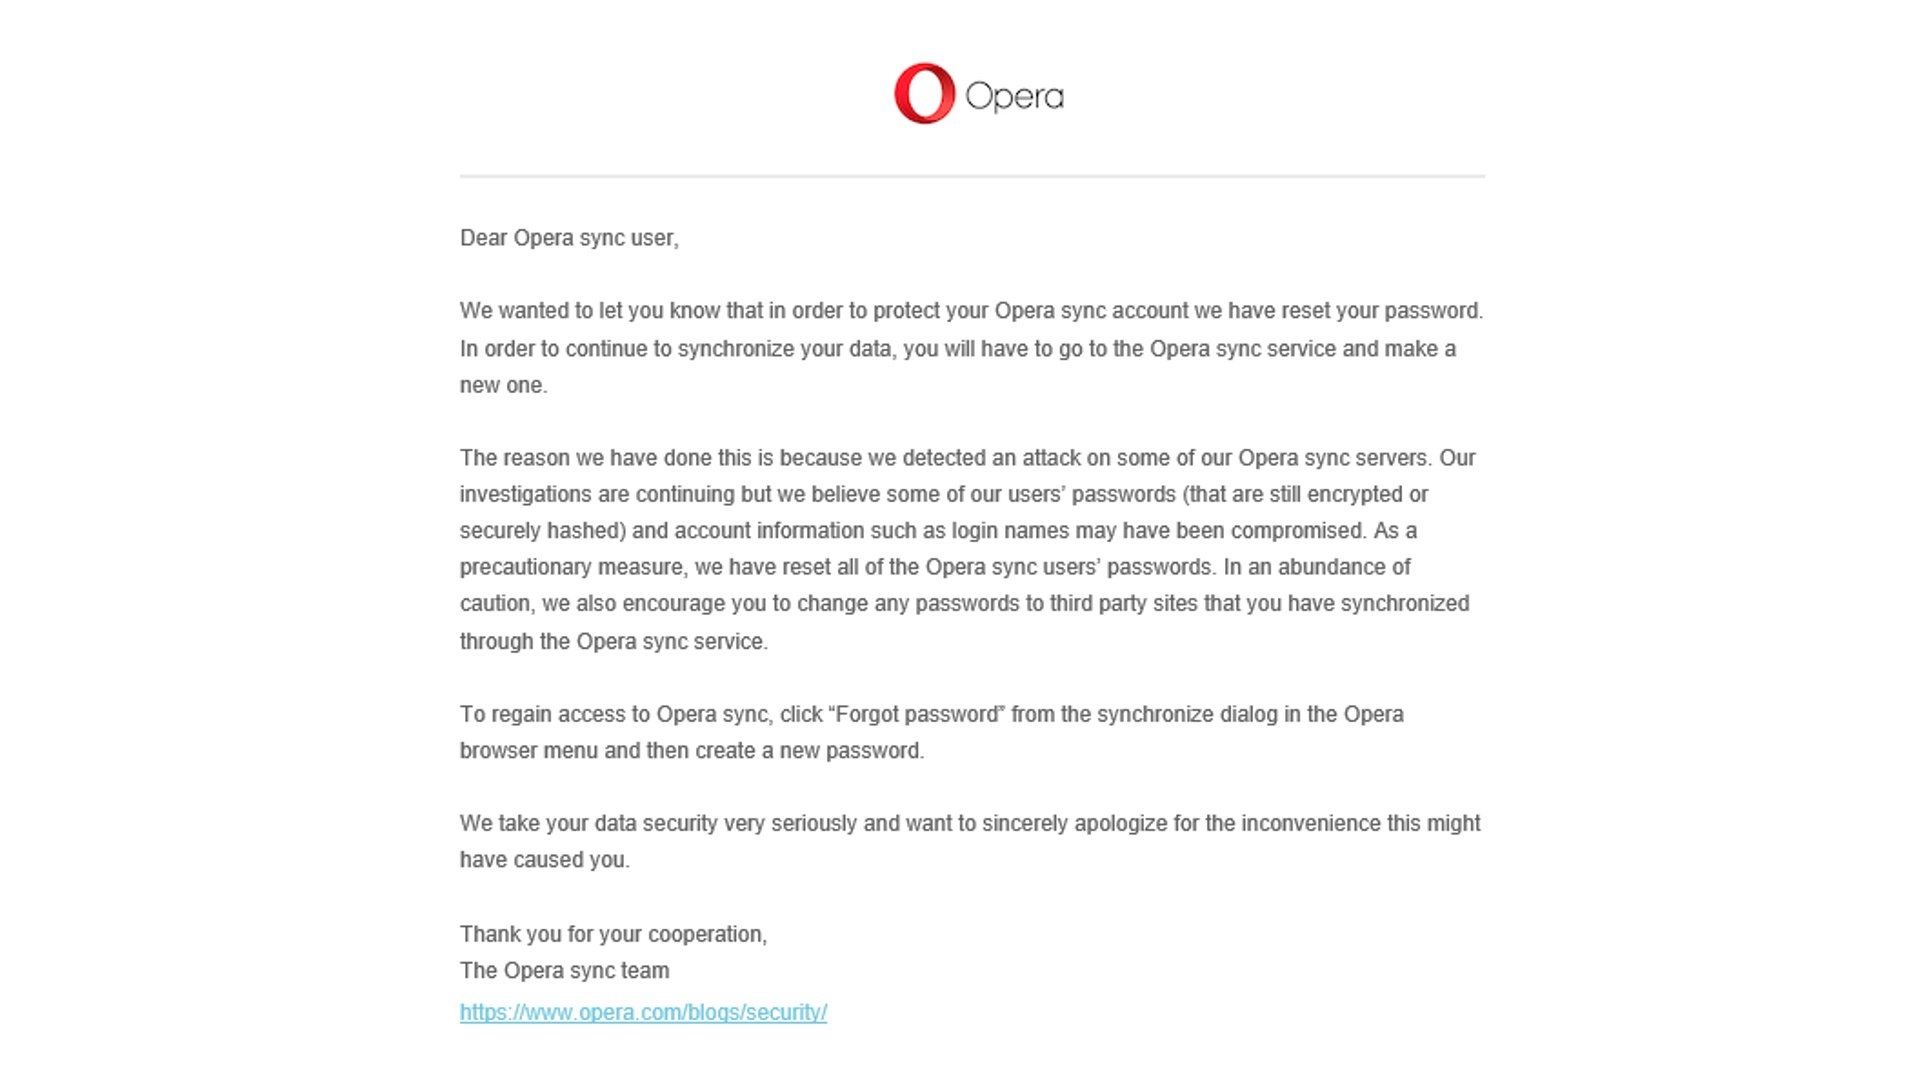 Opera Email - Please change your Opera account password